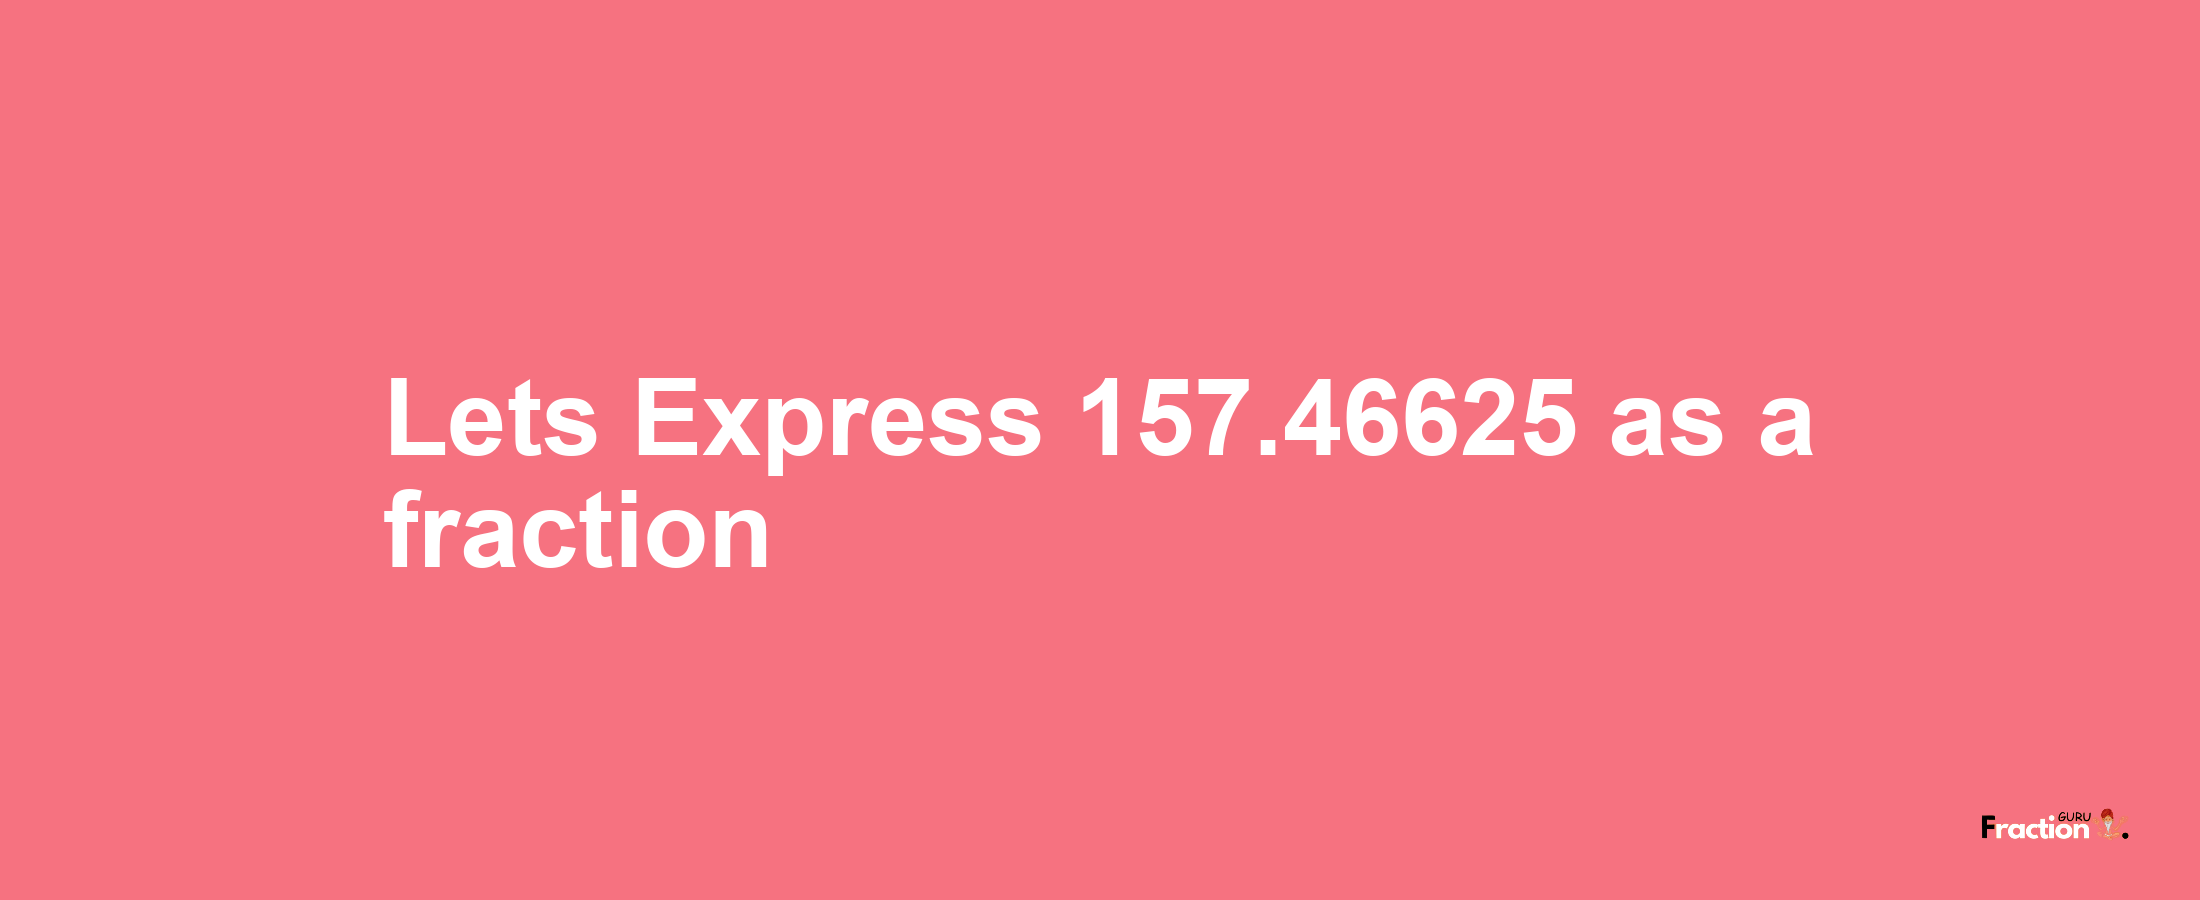 Lets Express 157.46625 as afraction